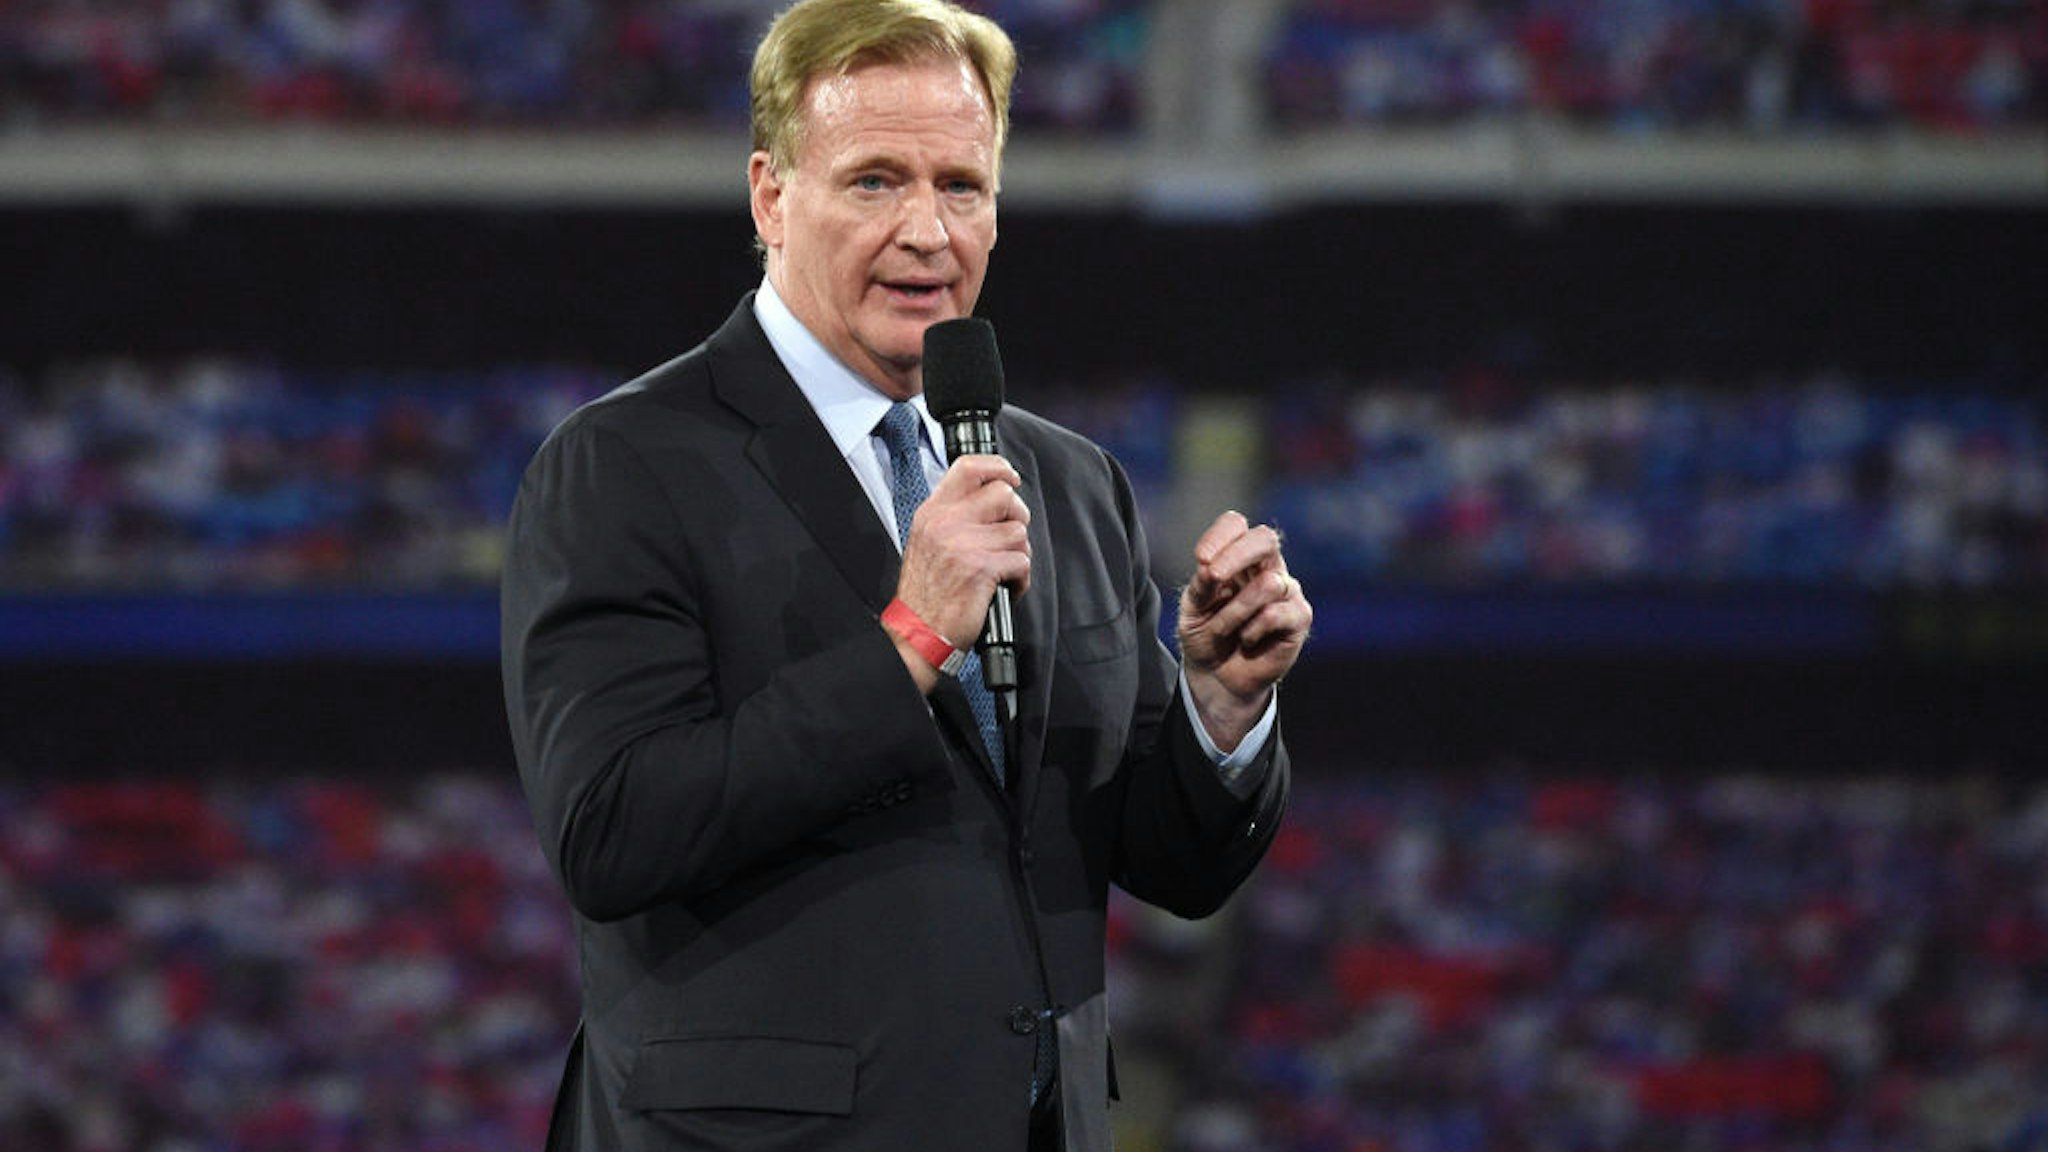 NEW YORK, NEW YORK - OCTOBER 20: Roger Goodell speaks onstage during the Robin Hood Benefit at Jacob Javits Center on October 20, 2021 in New York City. (Photo by Kevin Mazur/Getty Images for Robin Hood Foundation)